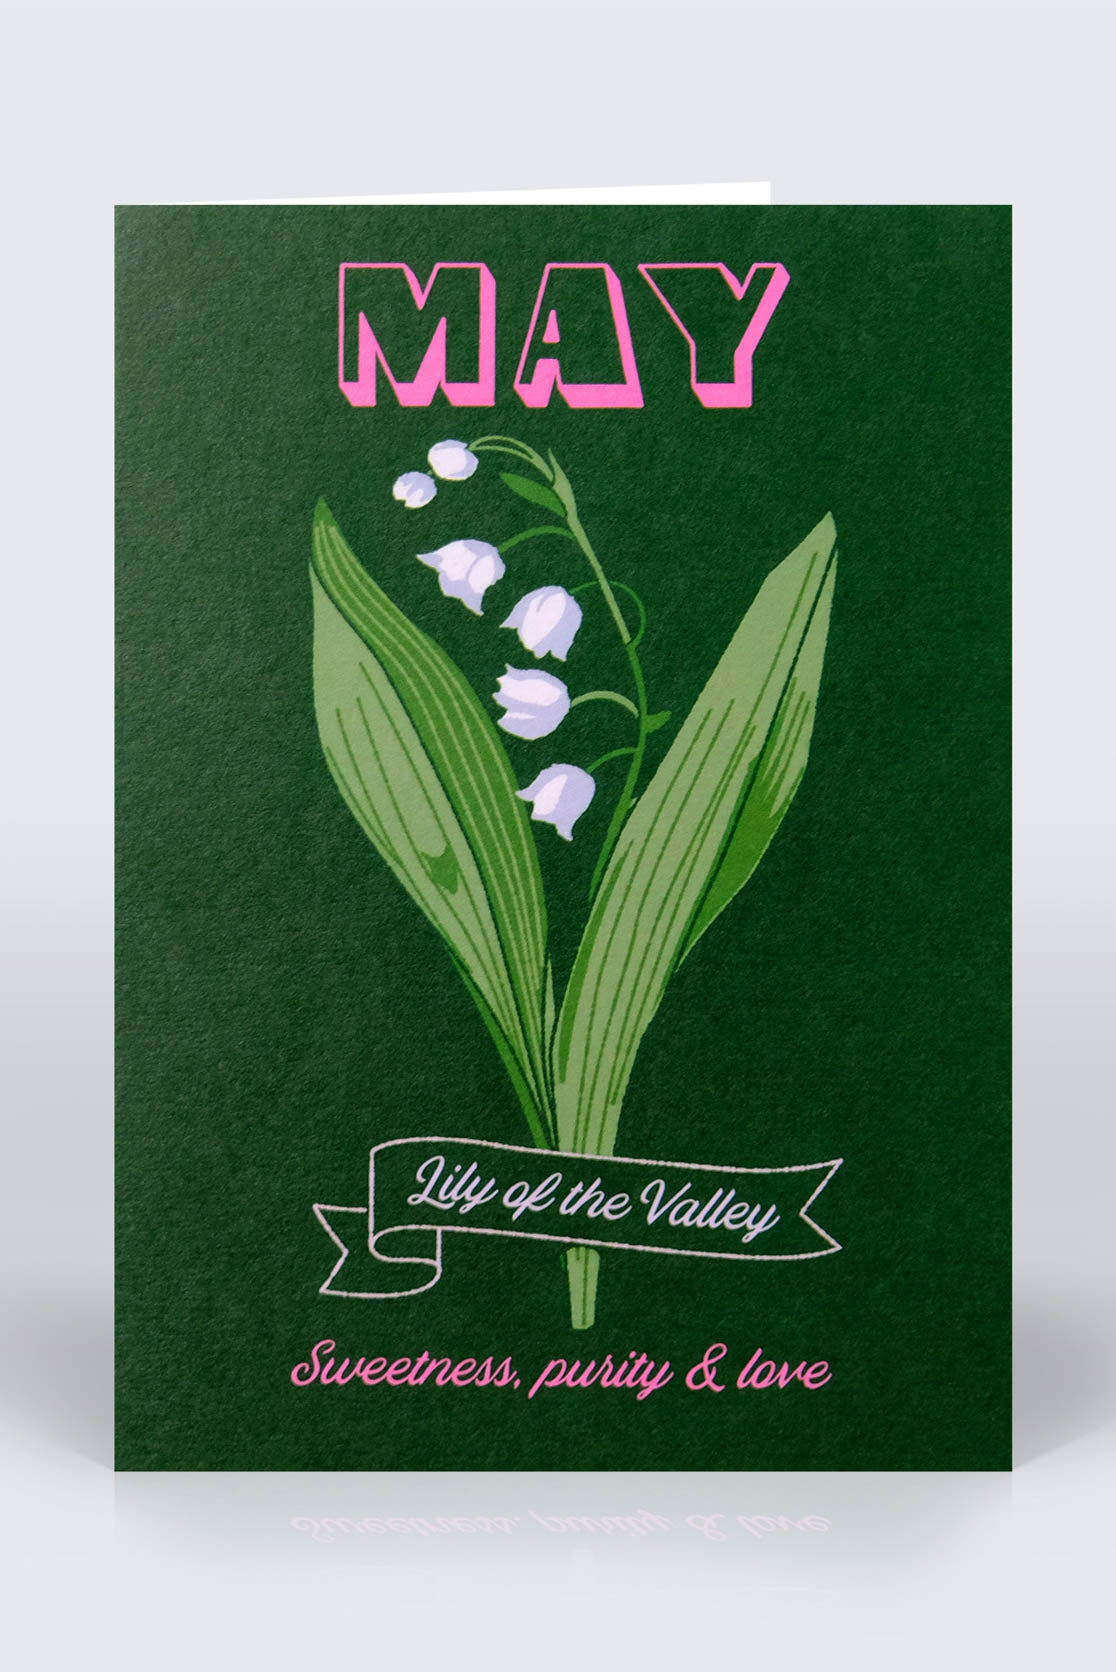 May birthday card on a dark green background with a lily flower on the front cover